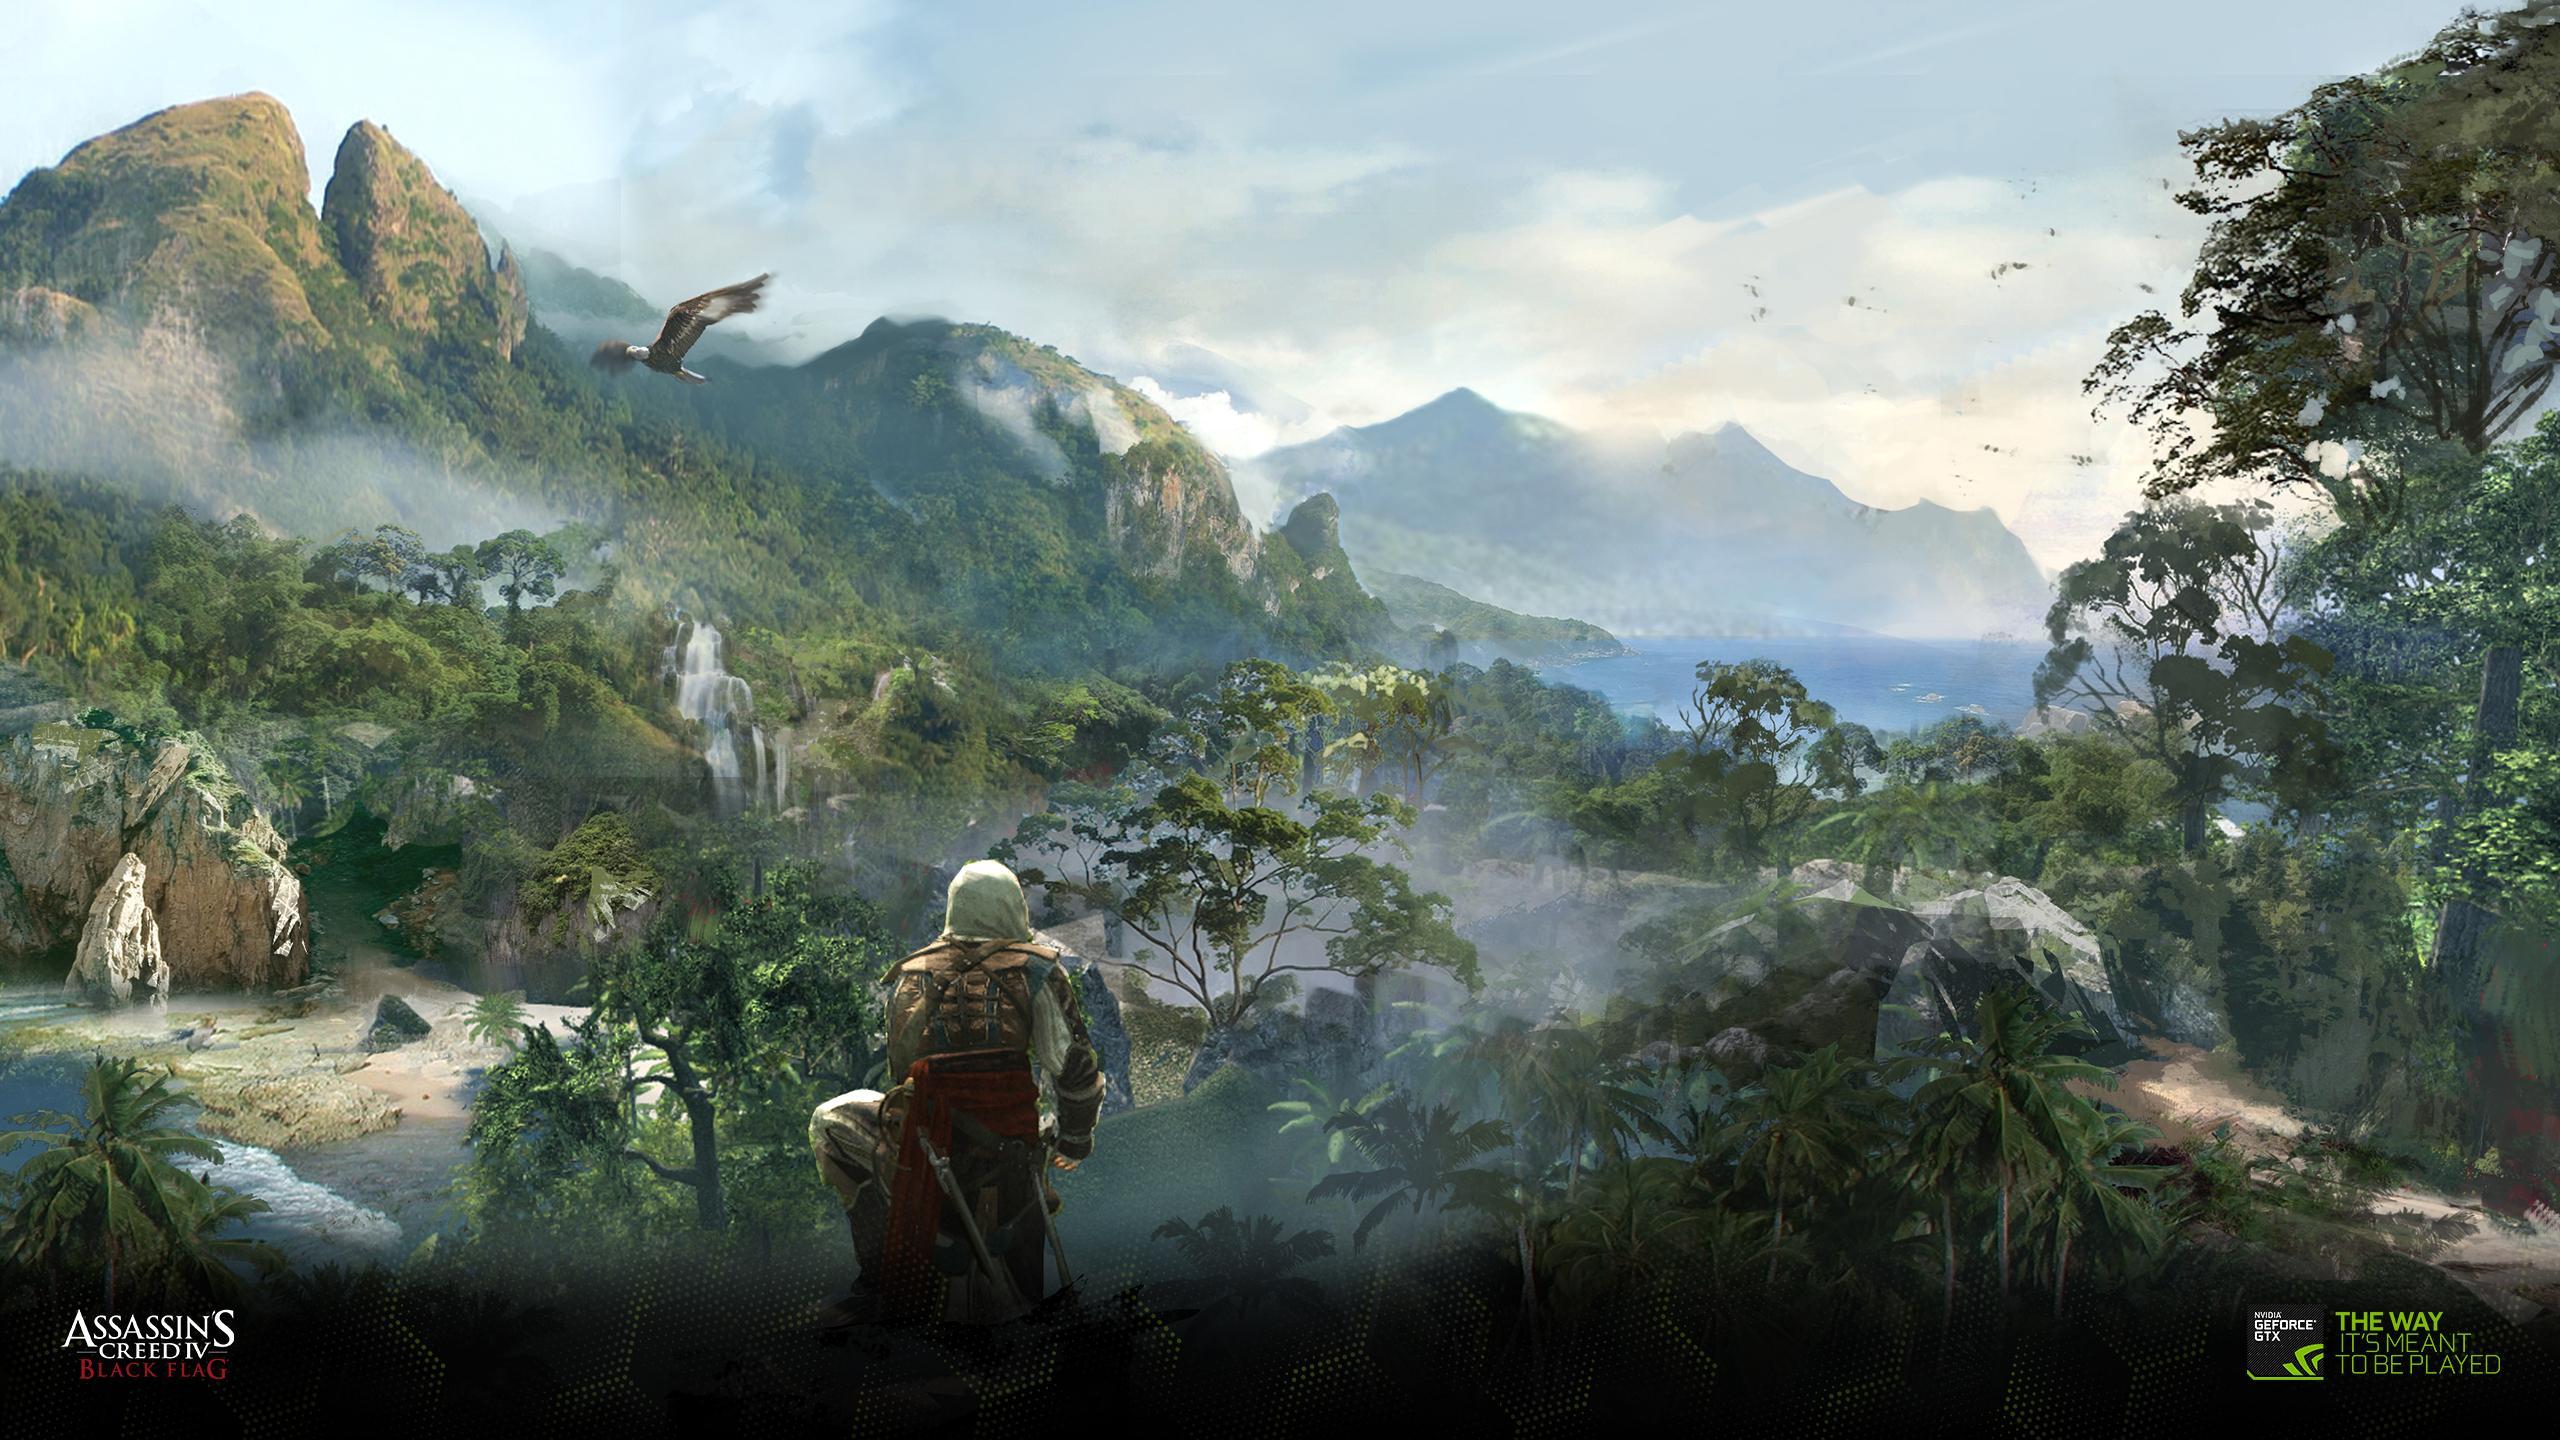 Download The Assassin&Creed IV Black Flag Wallpapers